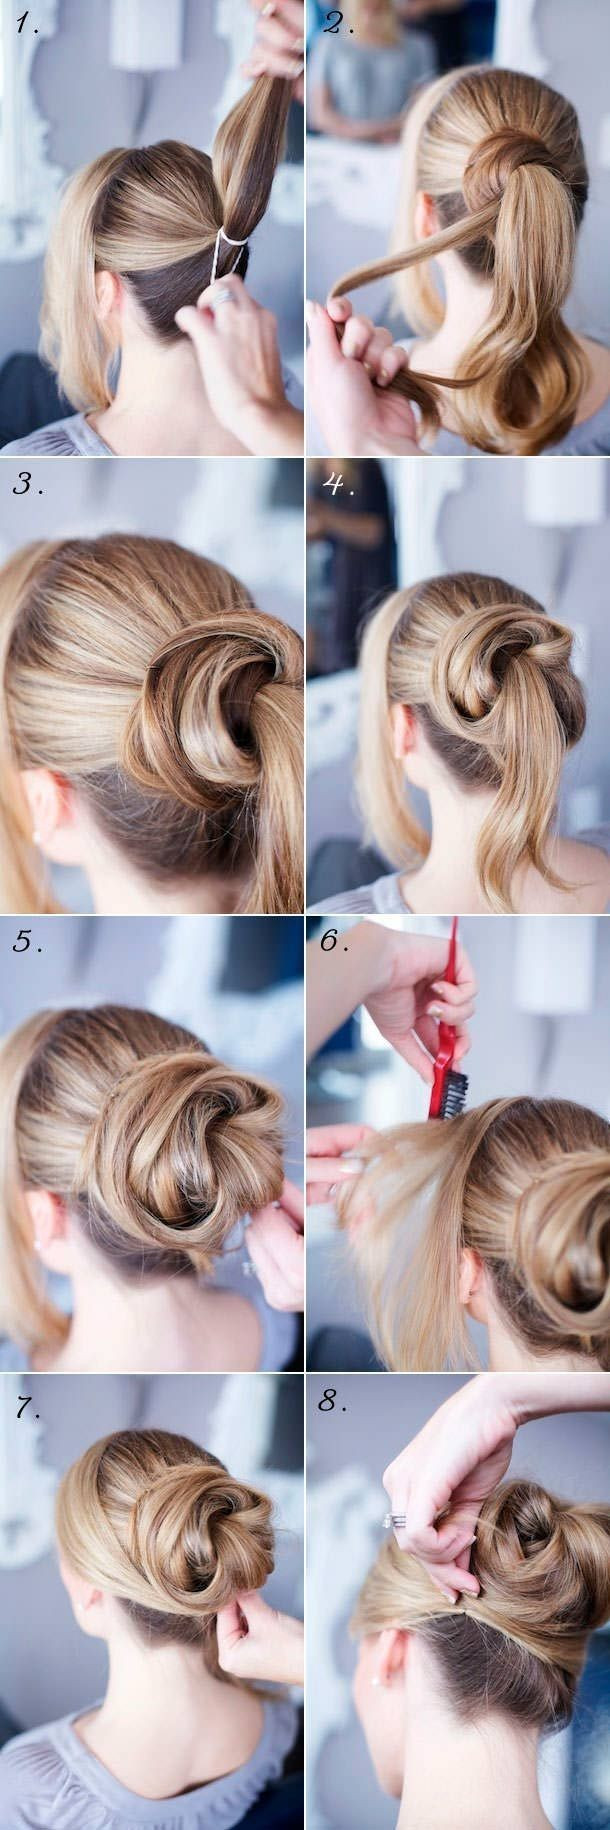 Cute And Easy Step By Step Hairstyles
 14 Easy Step by Step Updo Hairstyles Tutorials Pretty